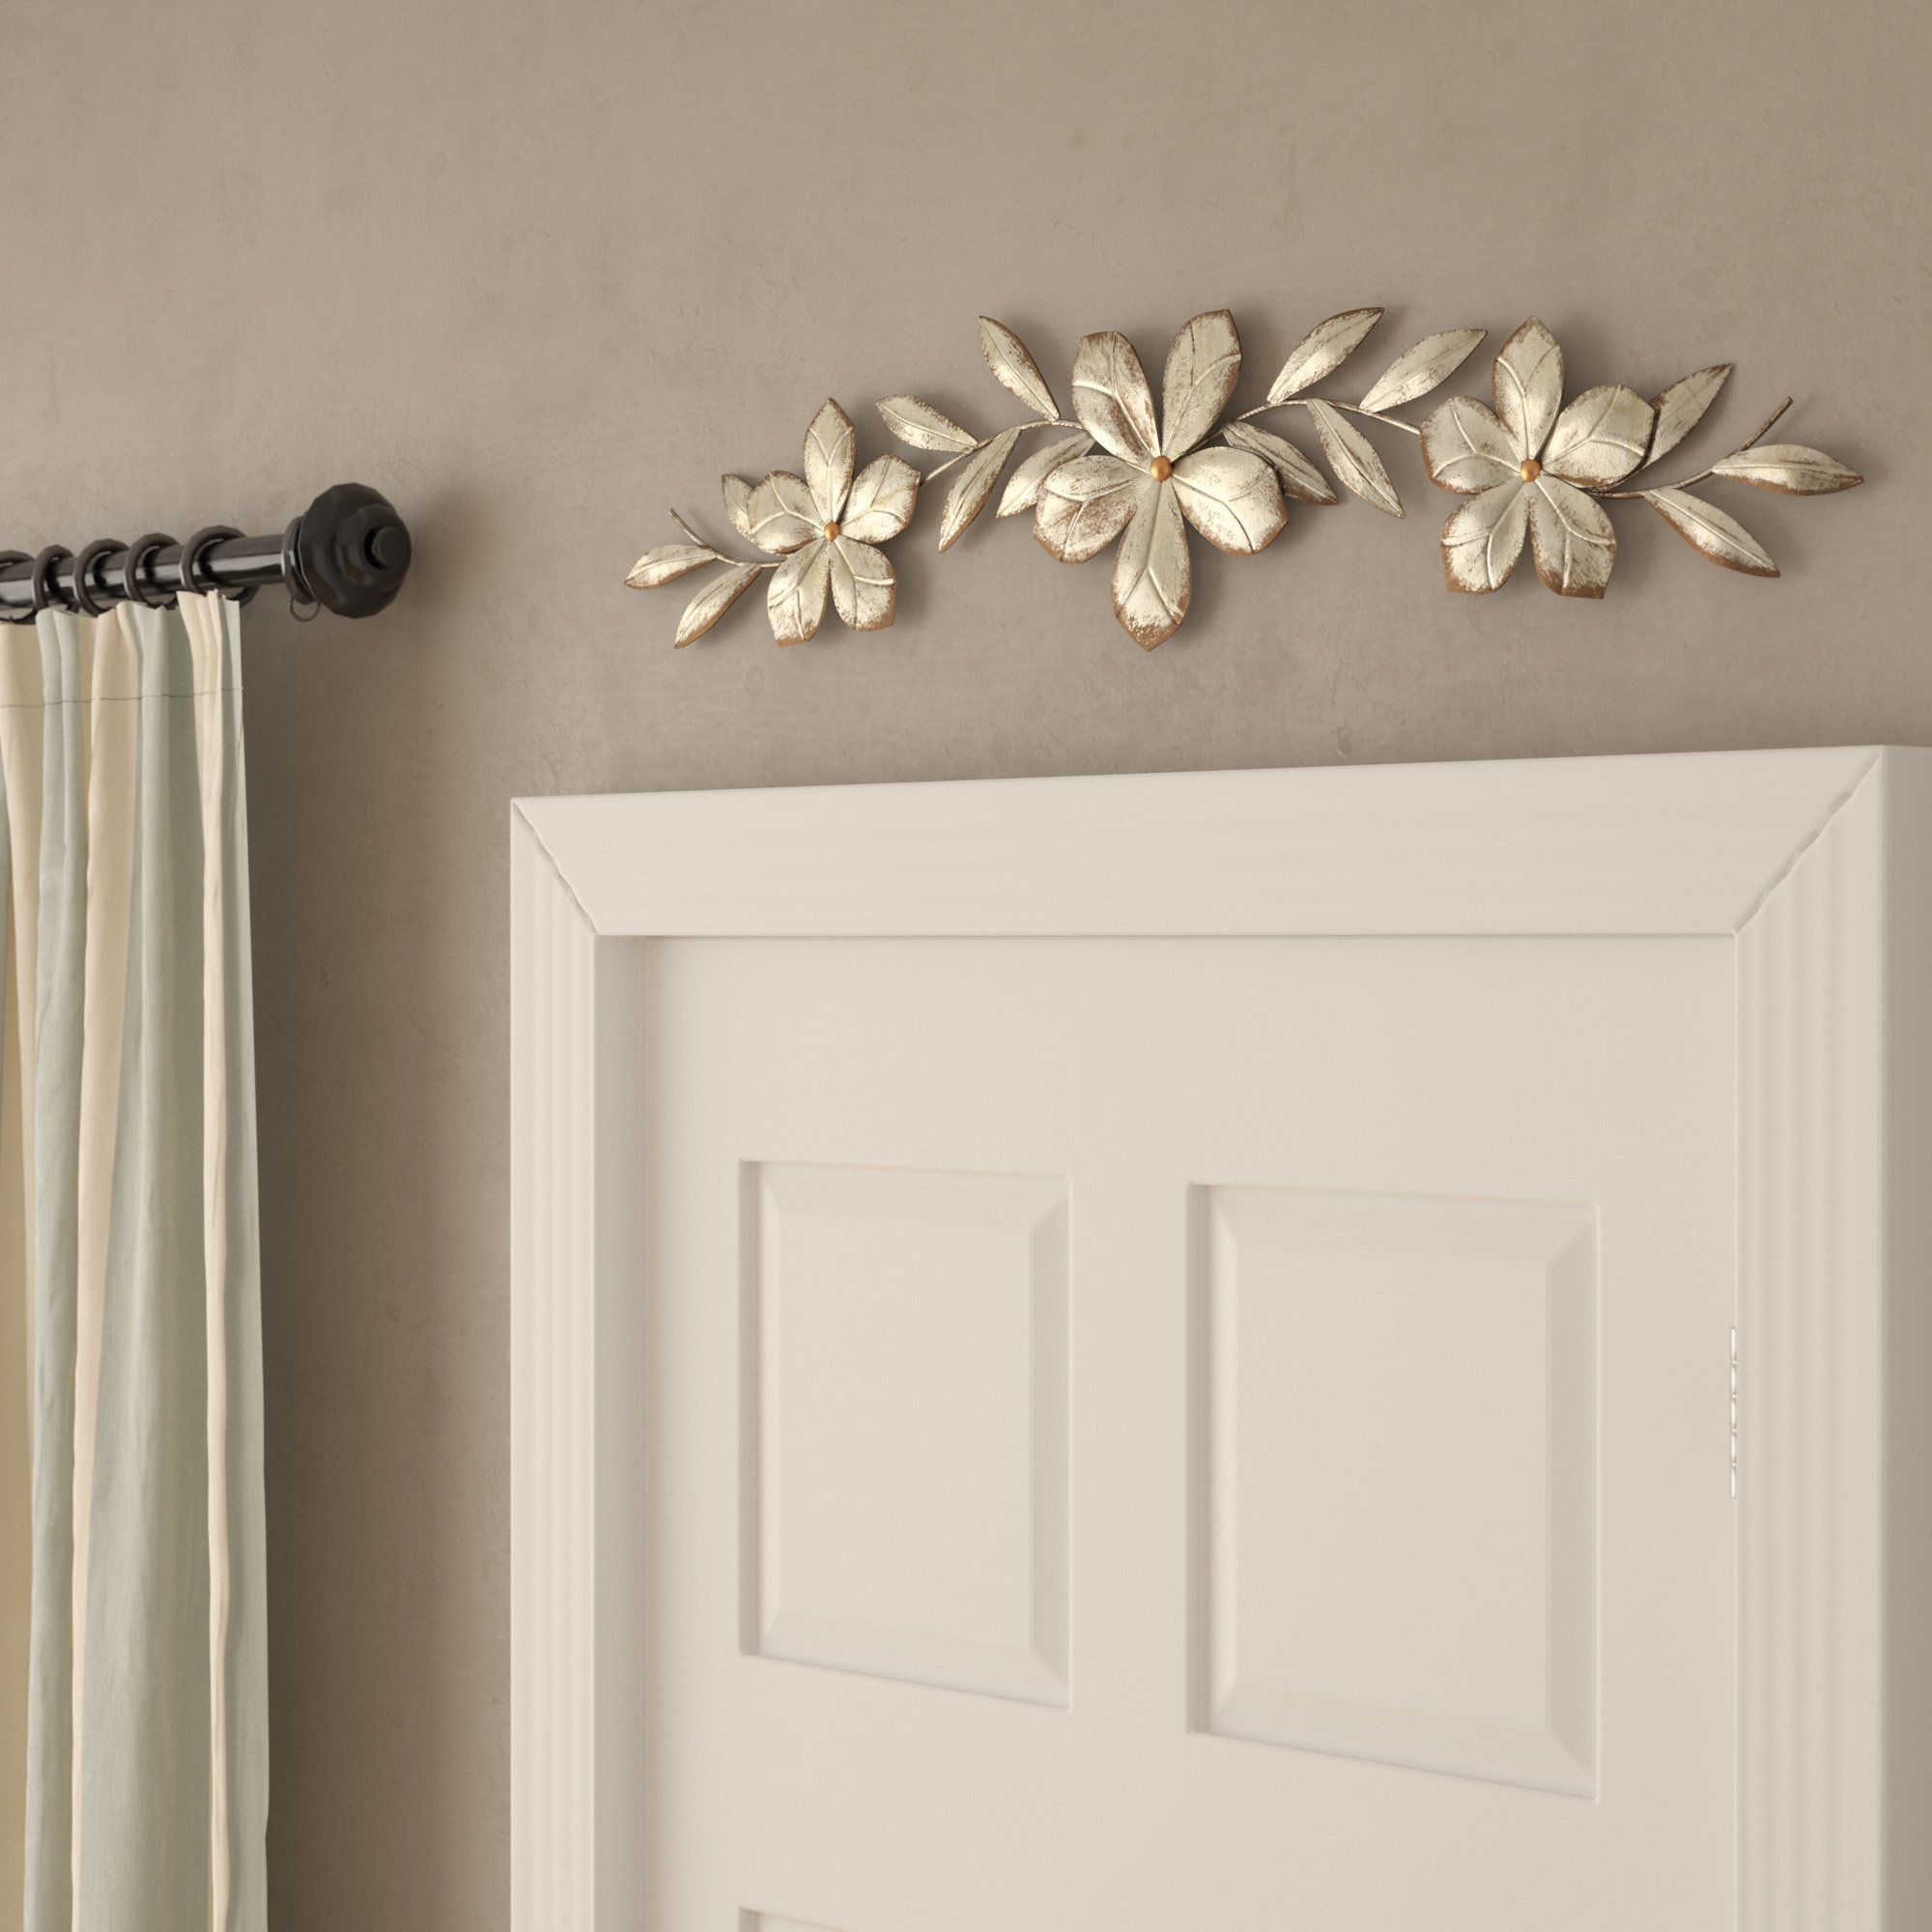 Wood Door Wall Decor | Wayfair For Floral Patterned Over The Door Wall Decor (View 2 of 30)